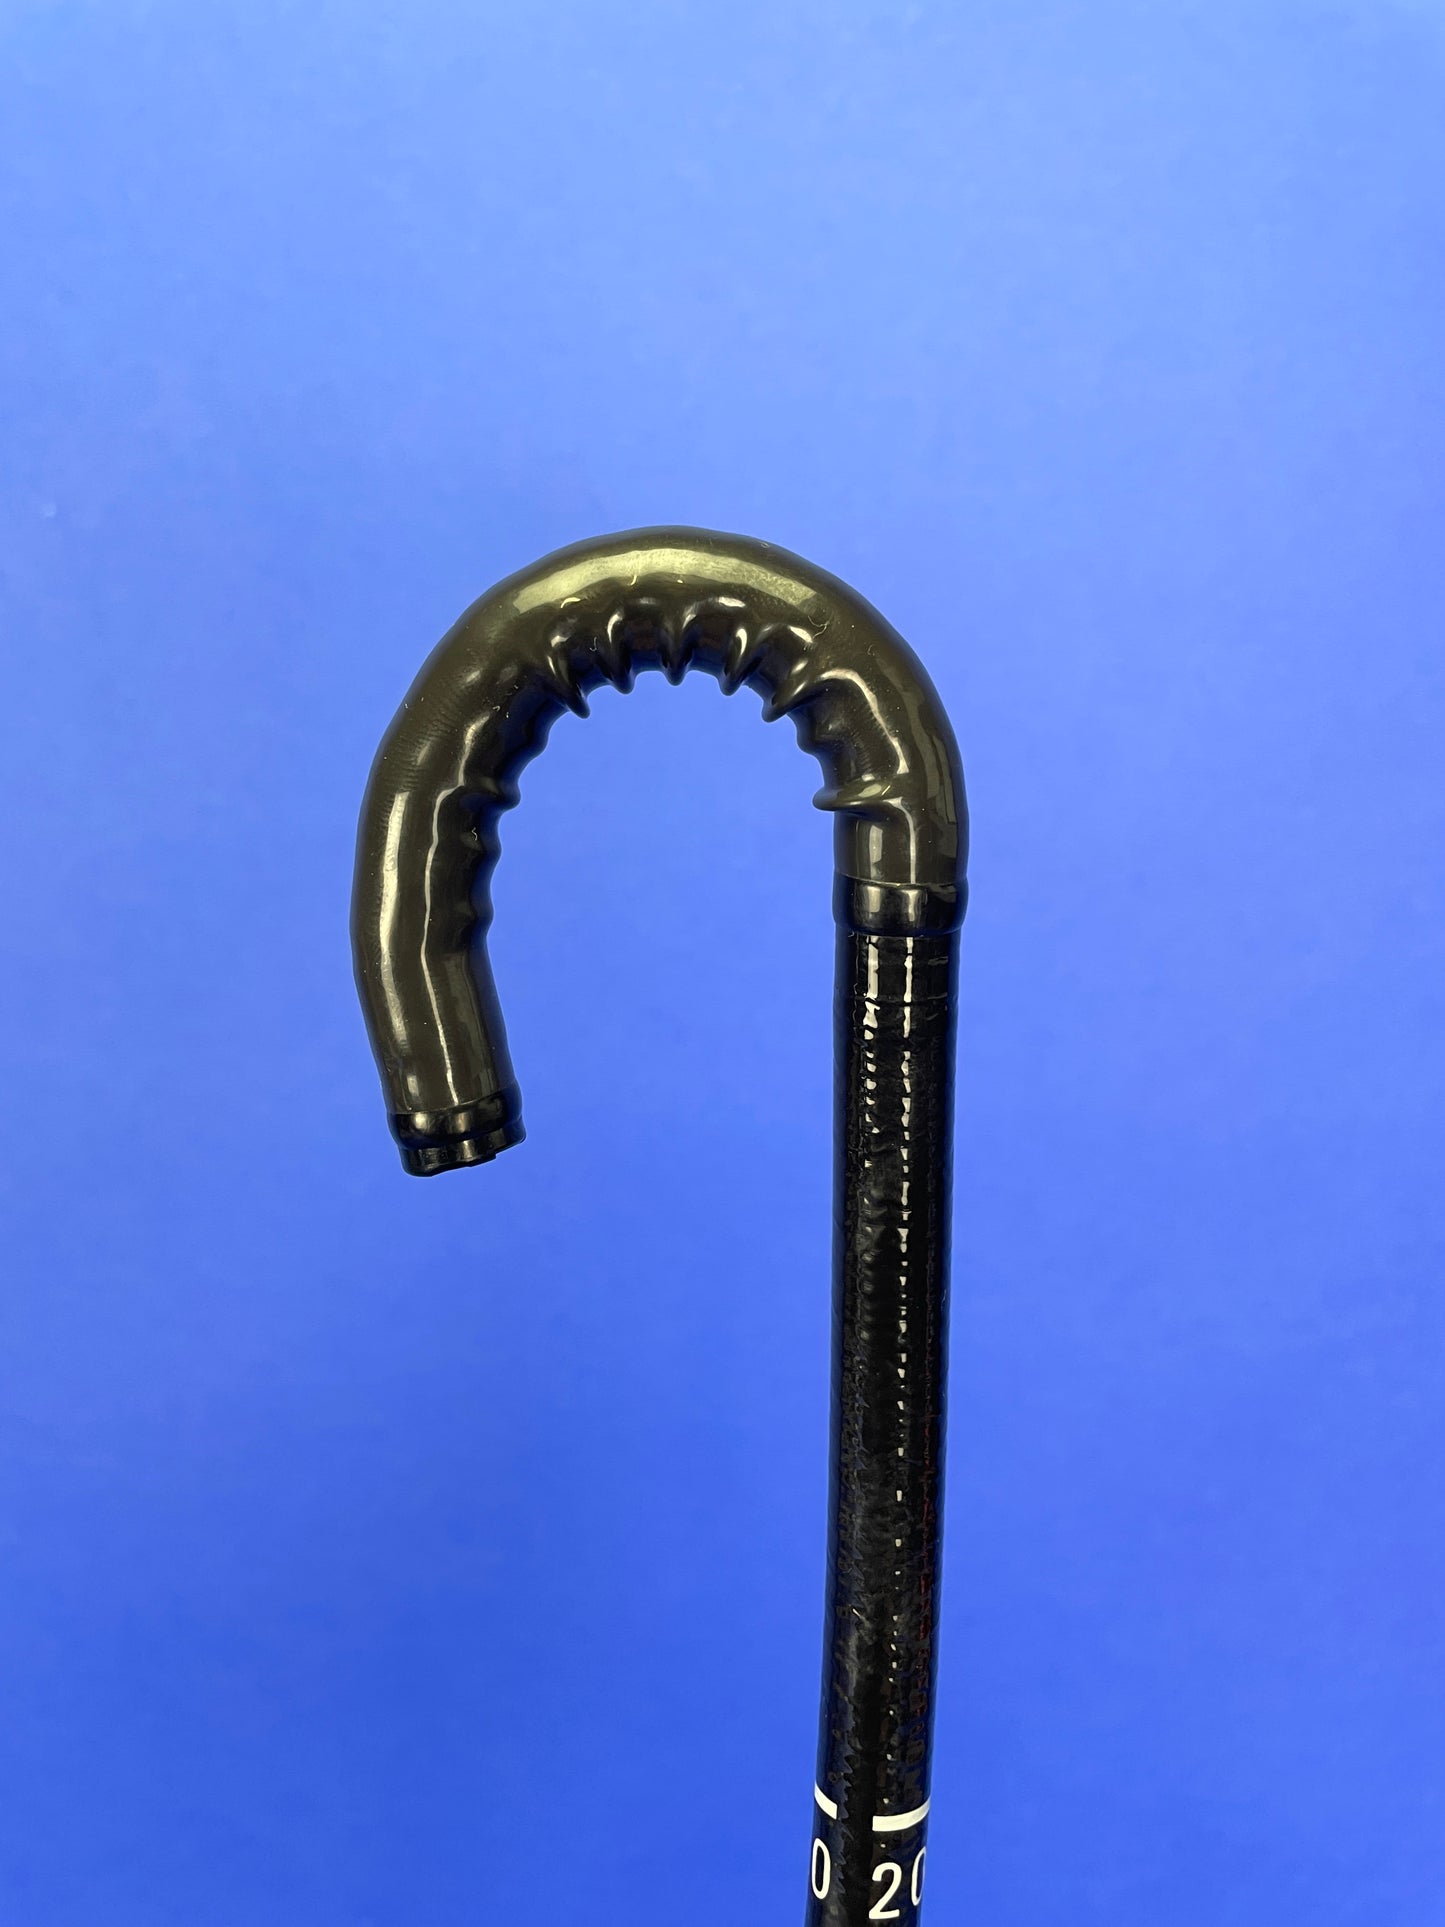 Different view of angulation of the Endoscope with great approach ability